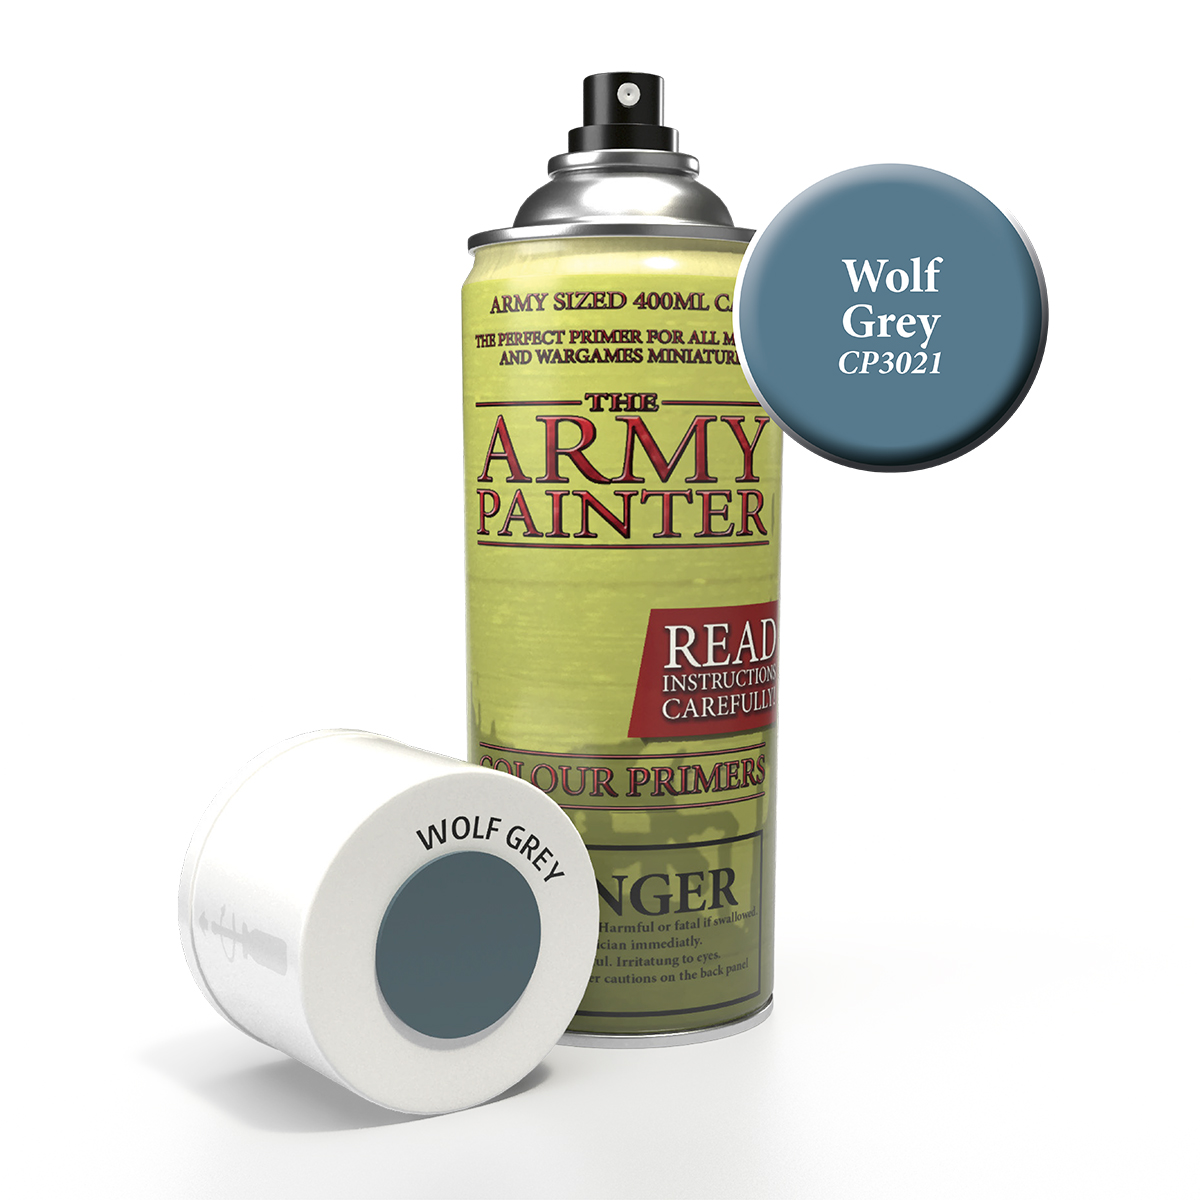 ArmyPainter Colorspray Wolf Grey